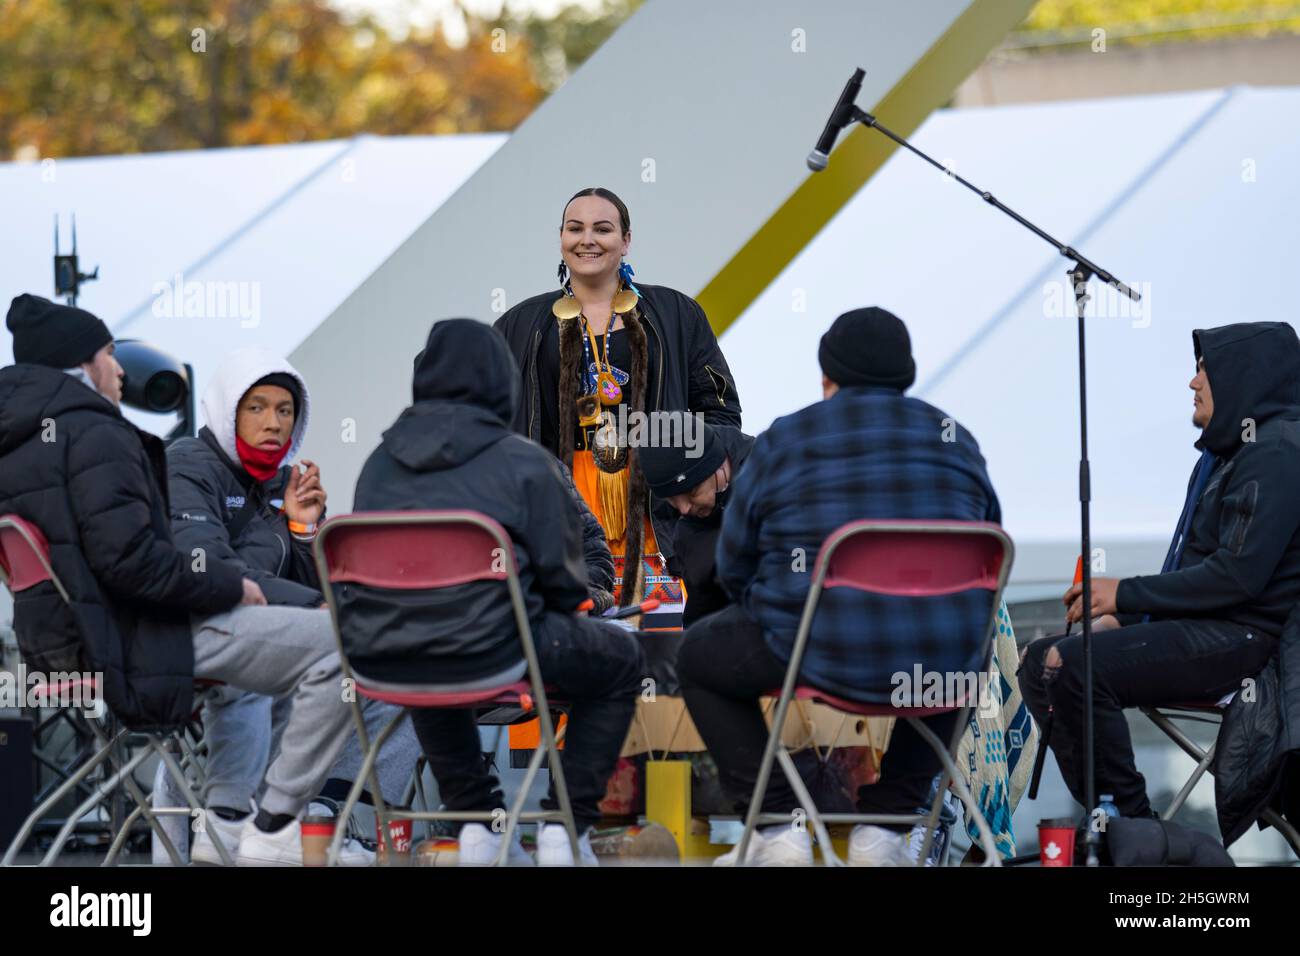 Young Indigenous Woman Danielle Migwans with All Nation Big Drum singers / drummers at Indigenous Legacy Gathering November 4, 2021 Toronto, Canada Stock Photo